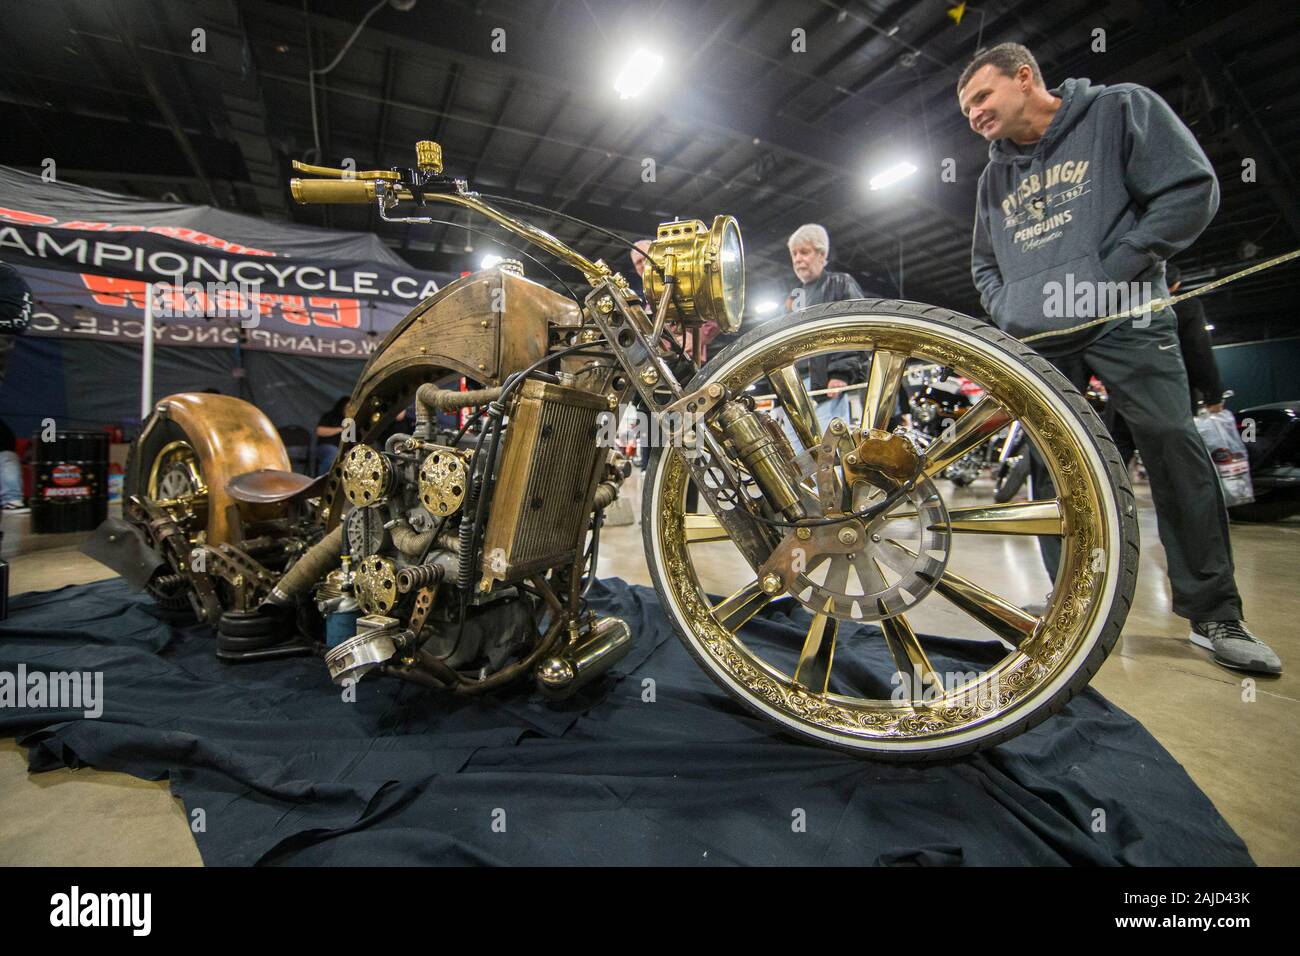 Toronto, Canada. 3rd Jan, 2020. People view a custom motorcycle at the 2020 North American International Motorcycle Supershow in Toronto, Canada, on Jan. 3, 2020. The annual three-day motorcycle was held